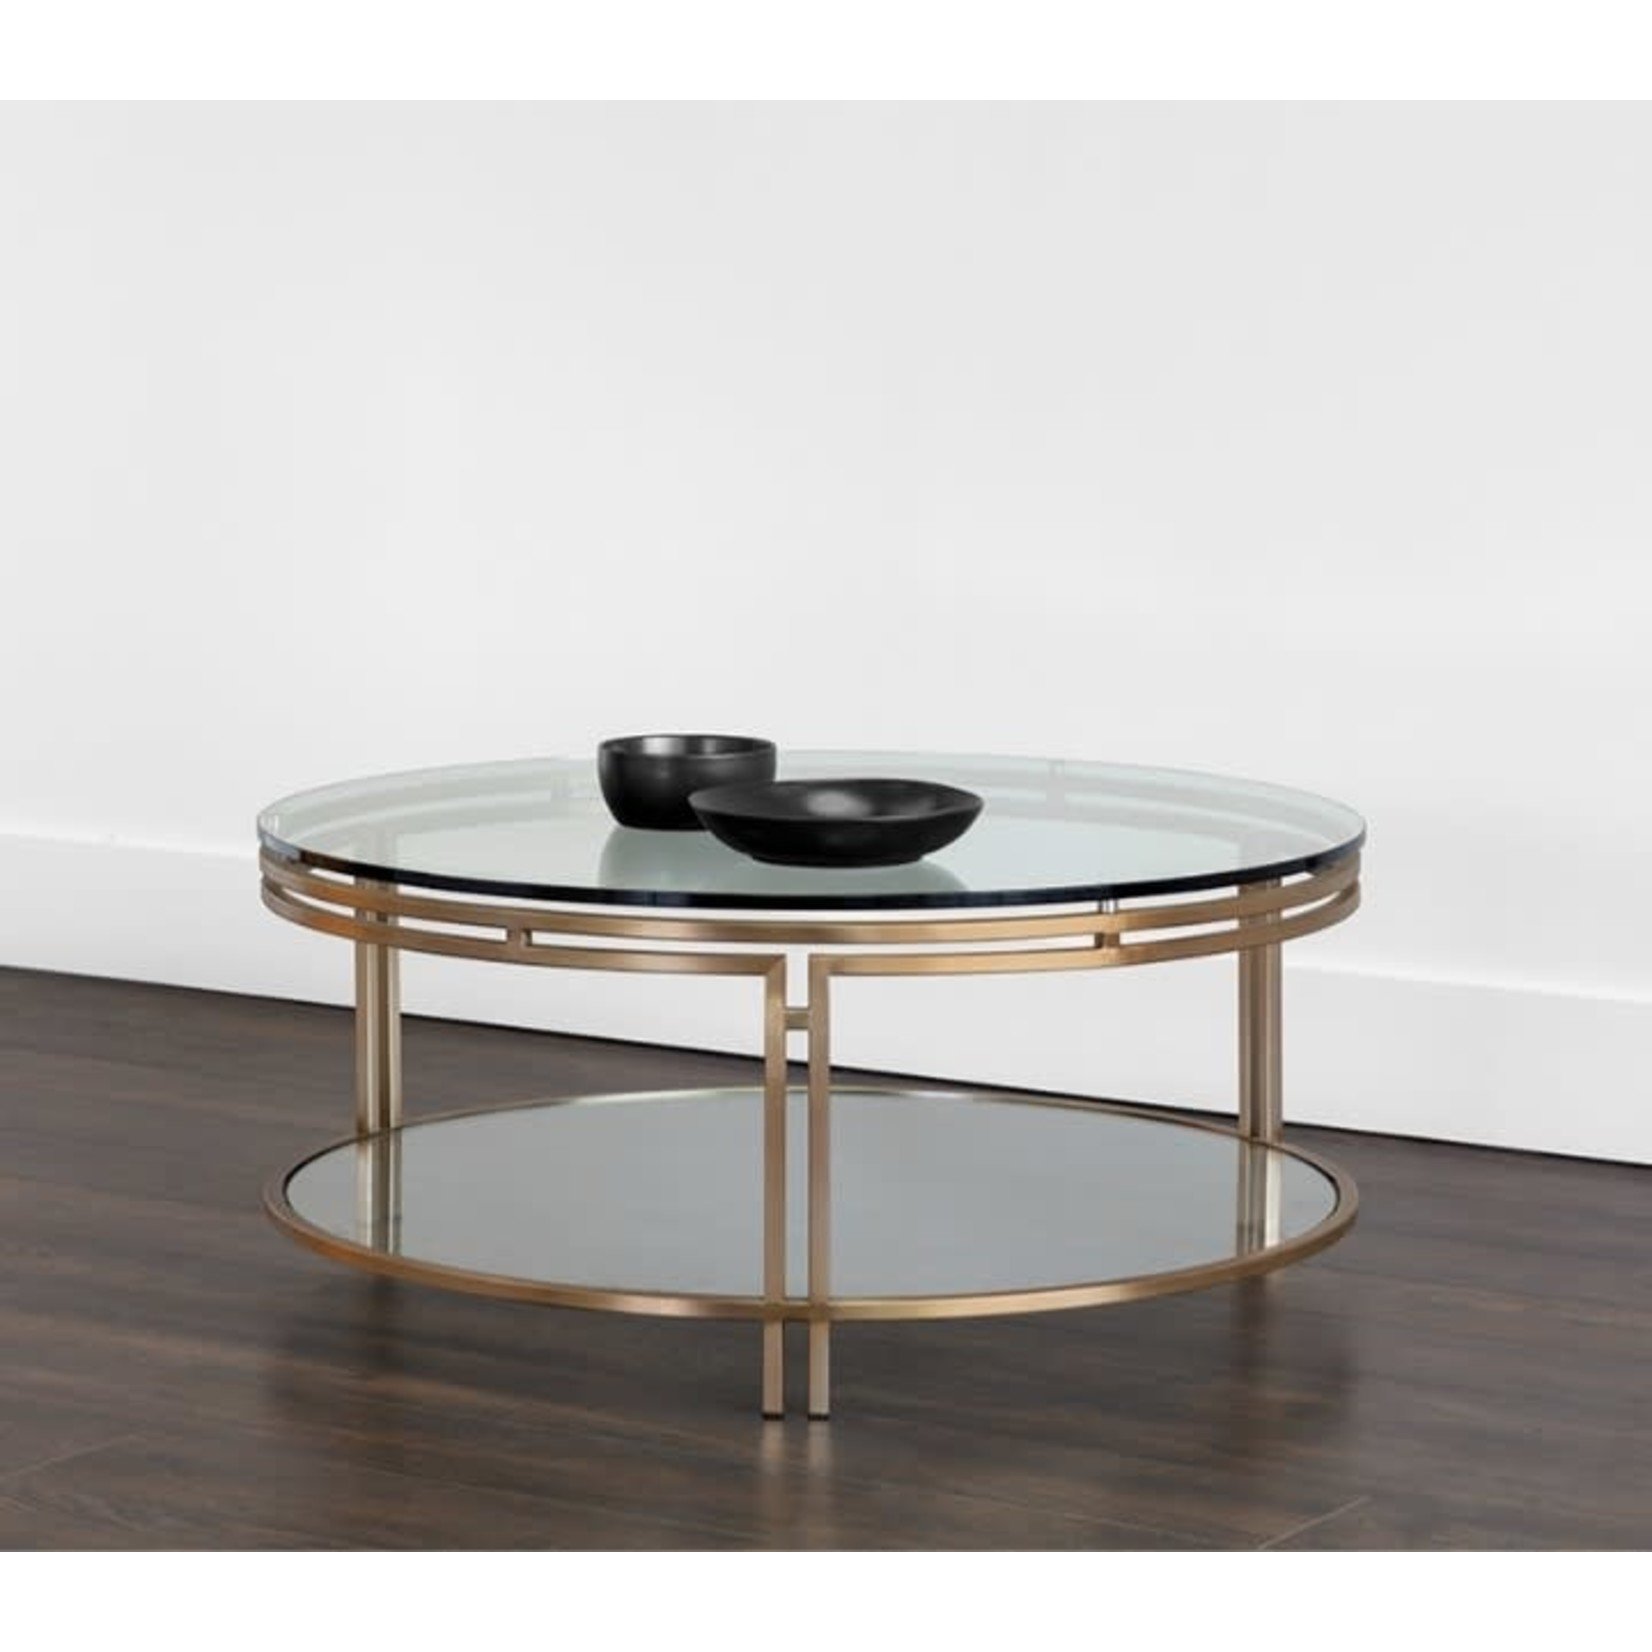 Mickler & Co. Andy Coffee Table